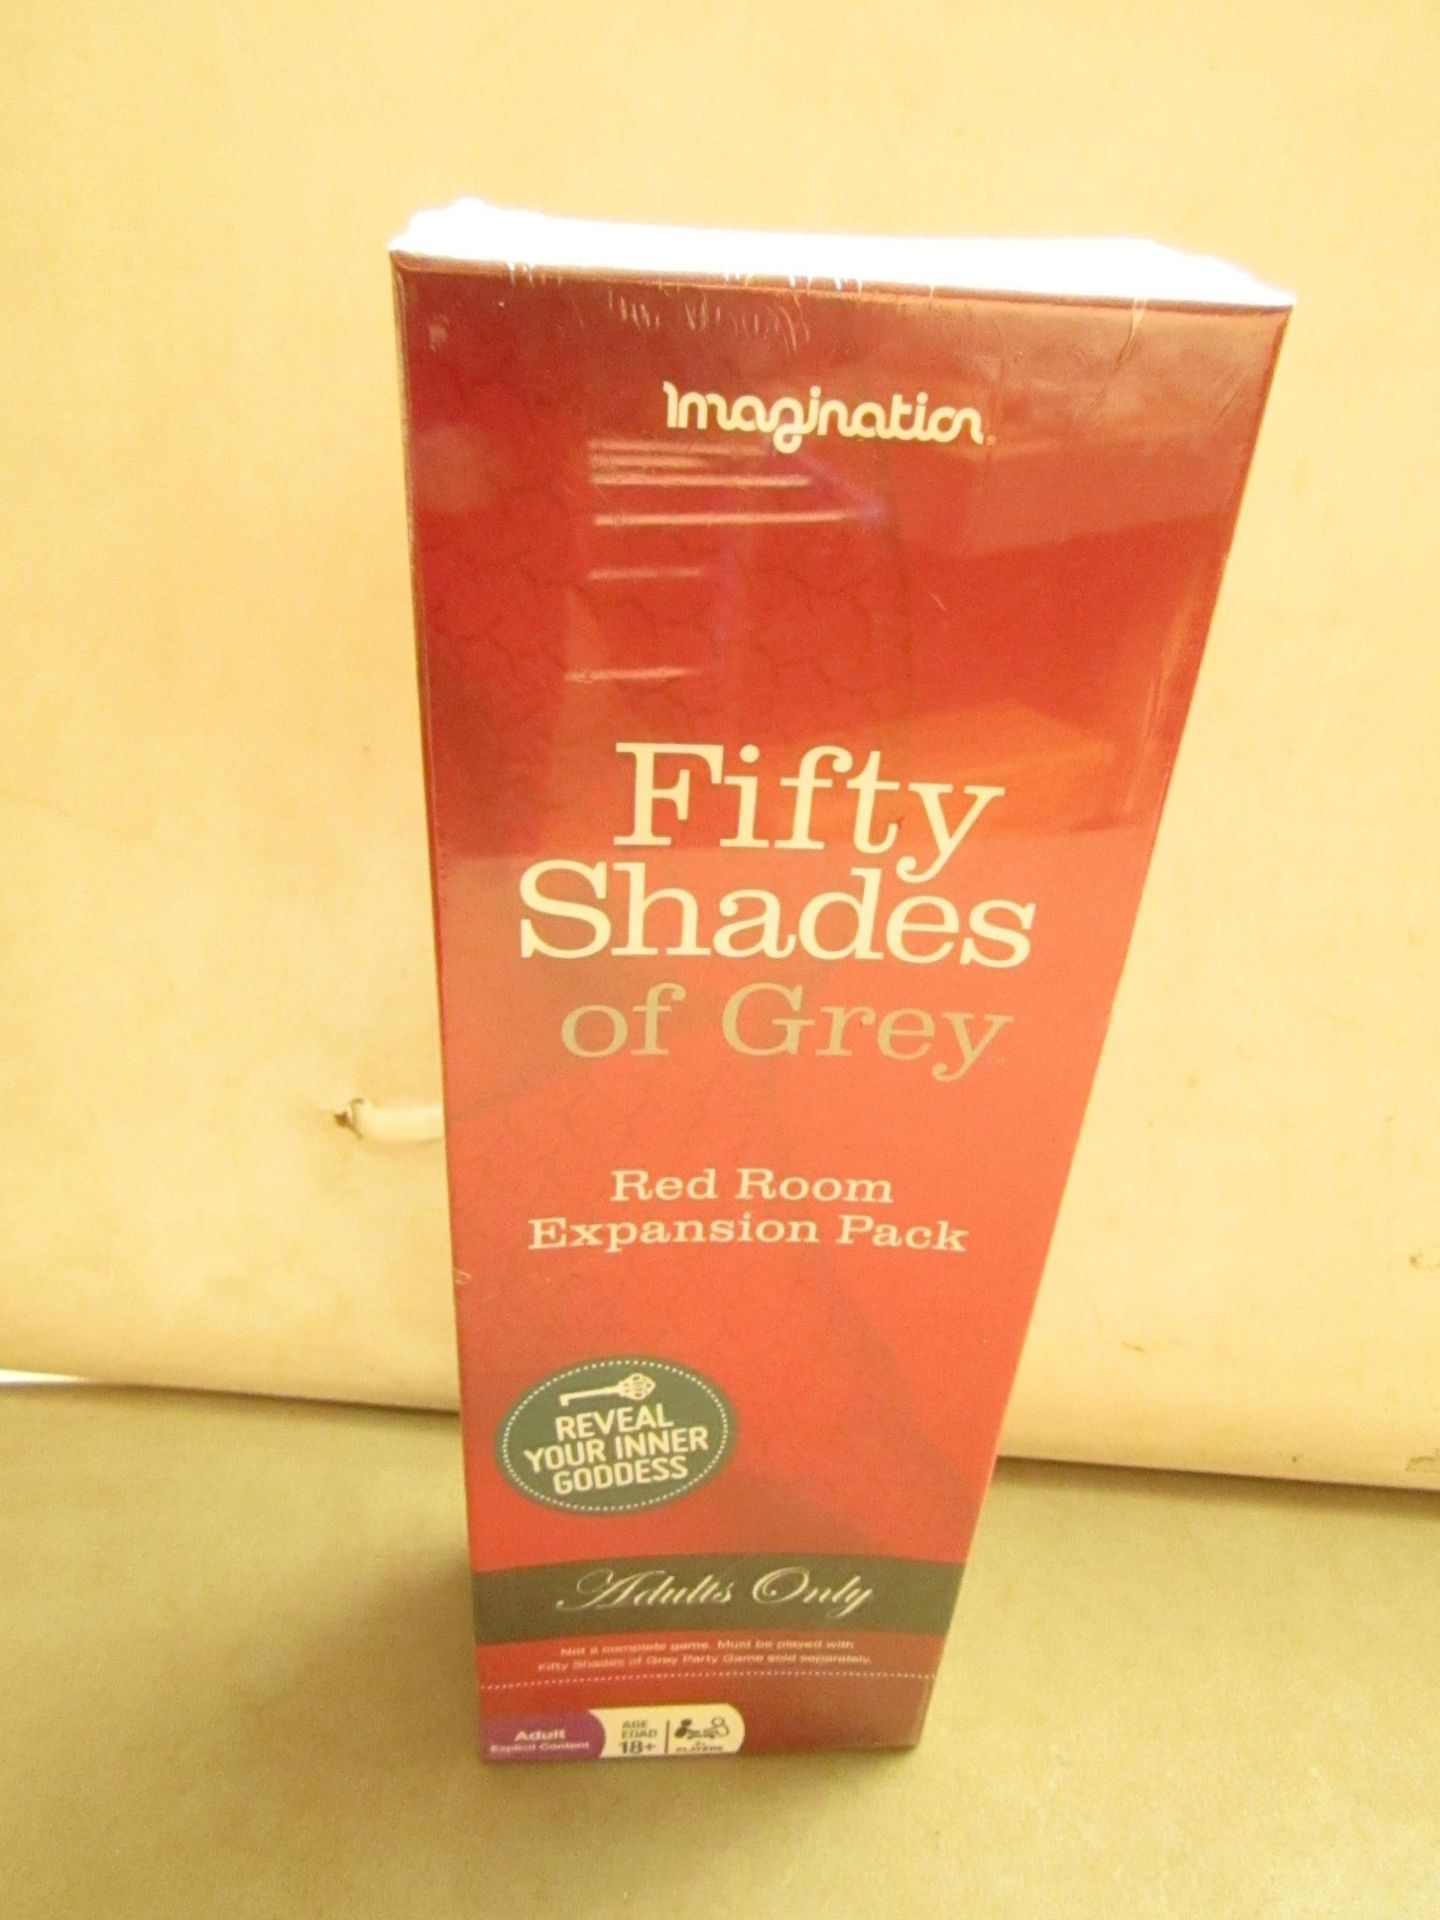 7 x Fifty Shades of Grey Red Room Expansion Packs. New & packaged